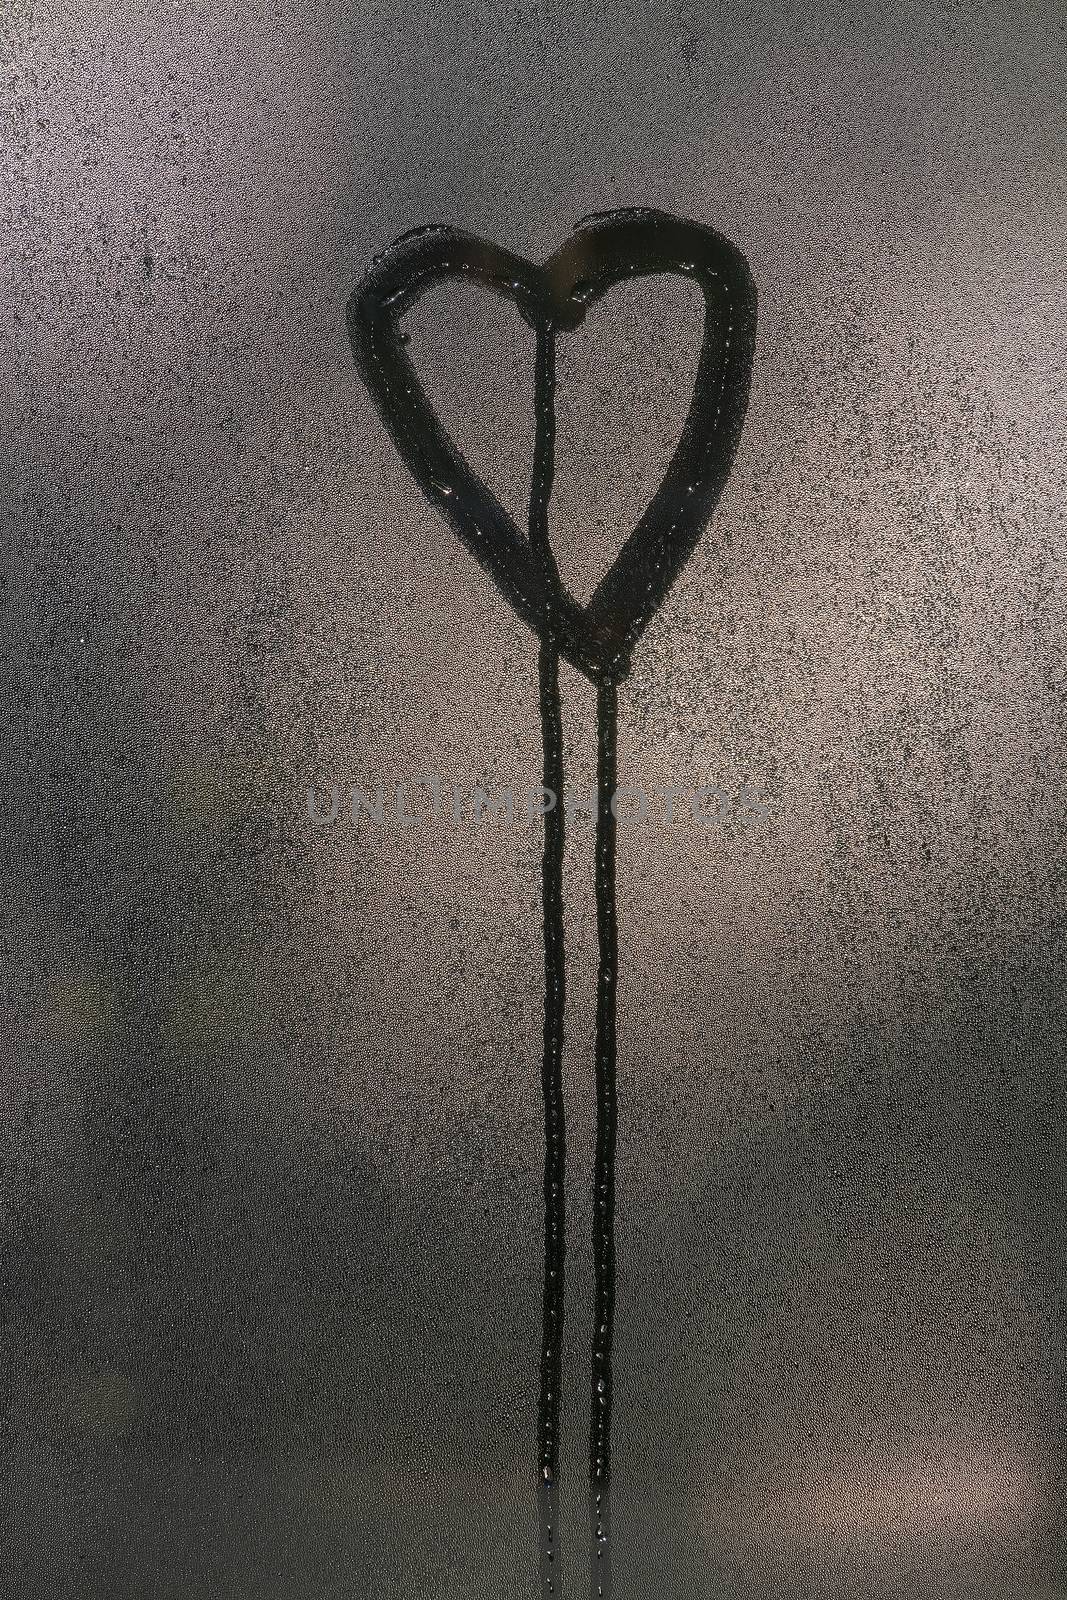 Window dew and drawn heart shape with running drops